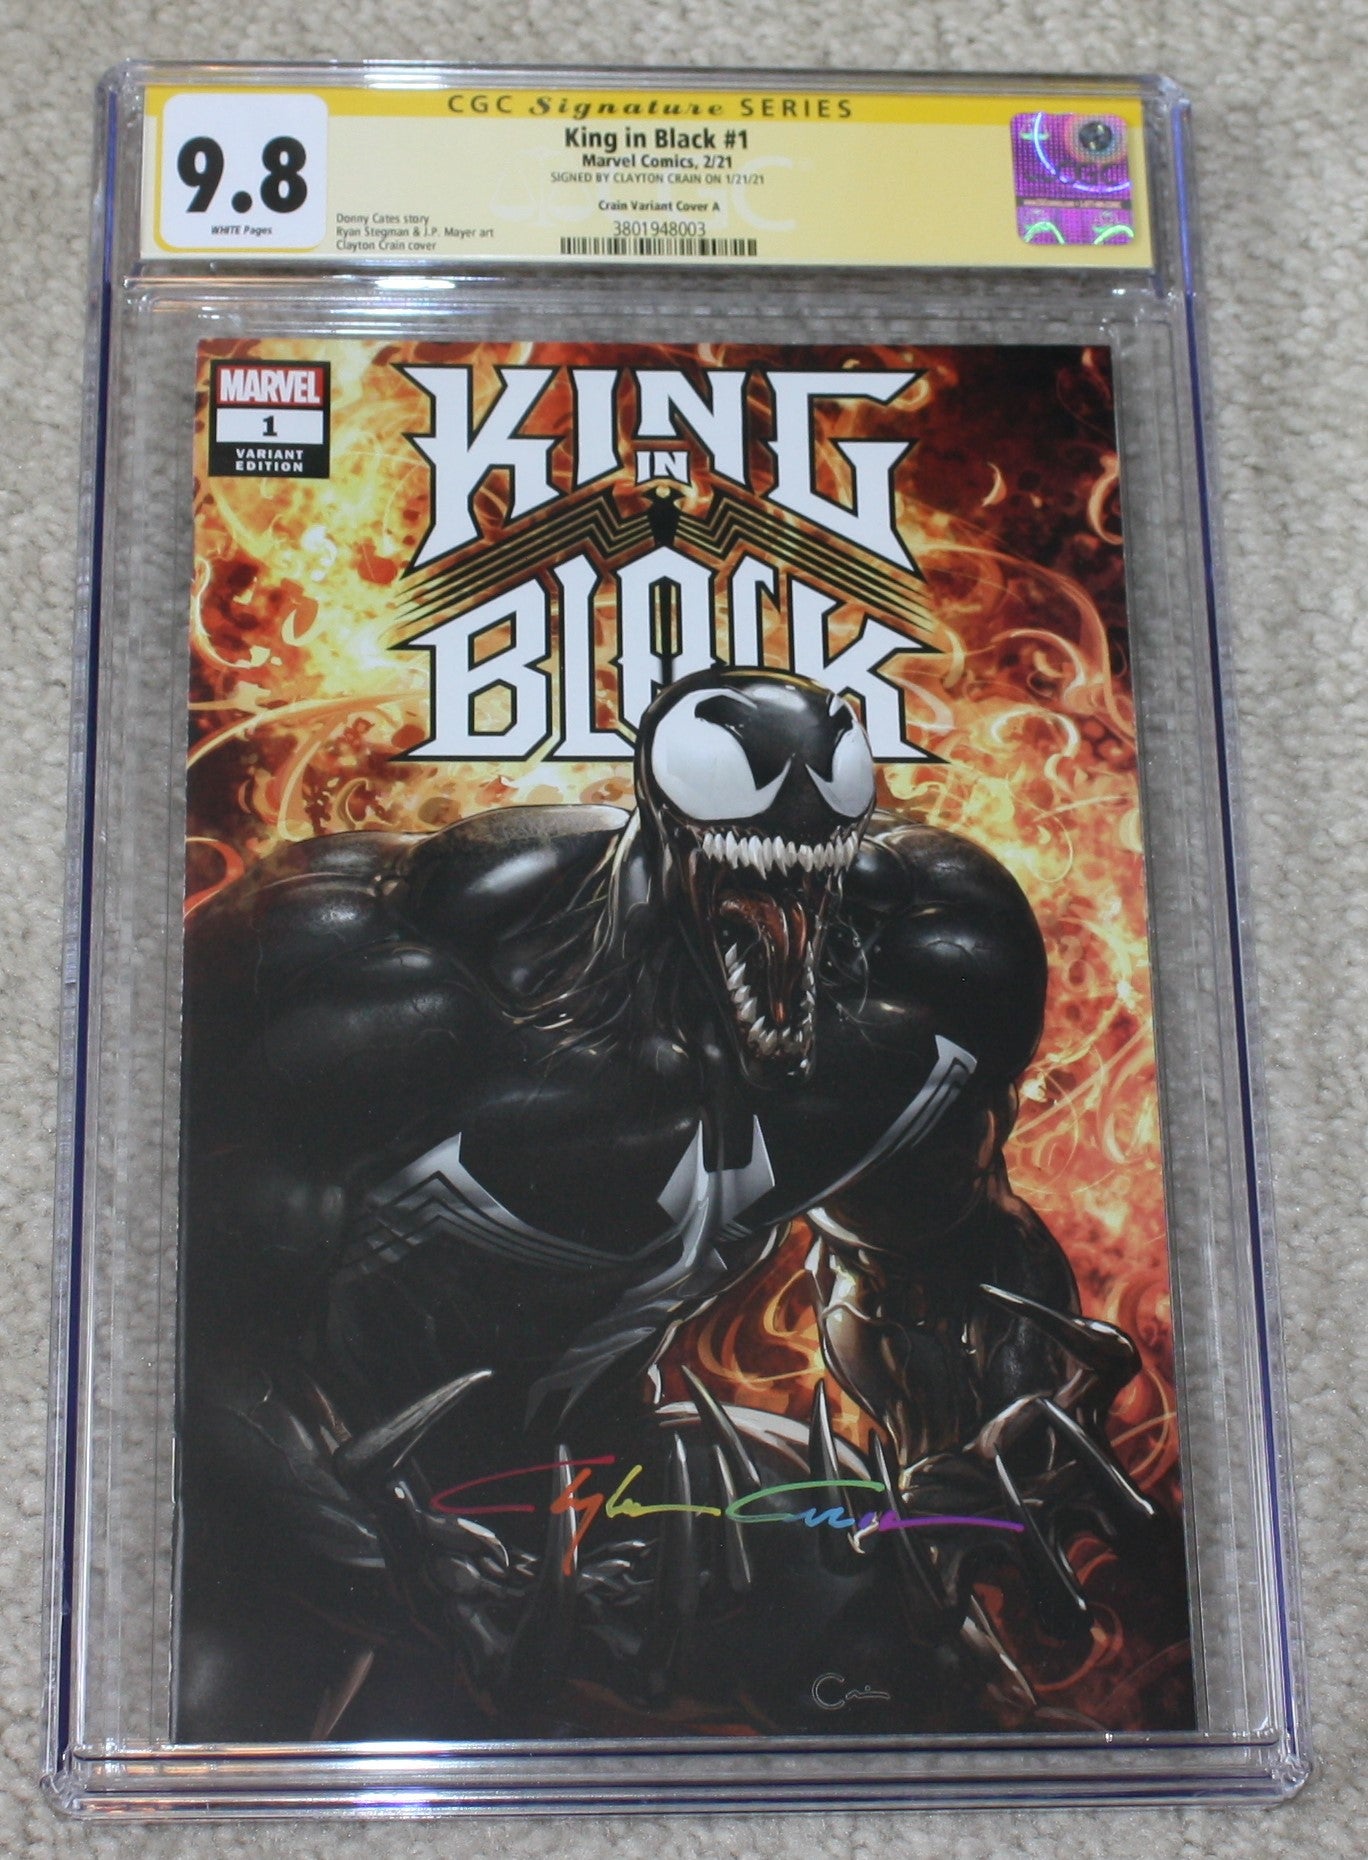 KING IN BLACK #1 CGC SS 9.8 CLAYTON CRAIN INFINITY SIGNED VENOM TRADE DRESS VARIANT-A